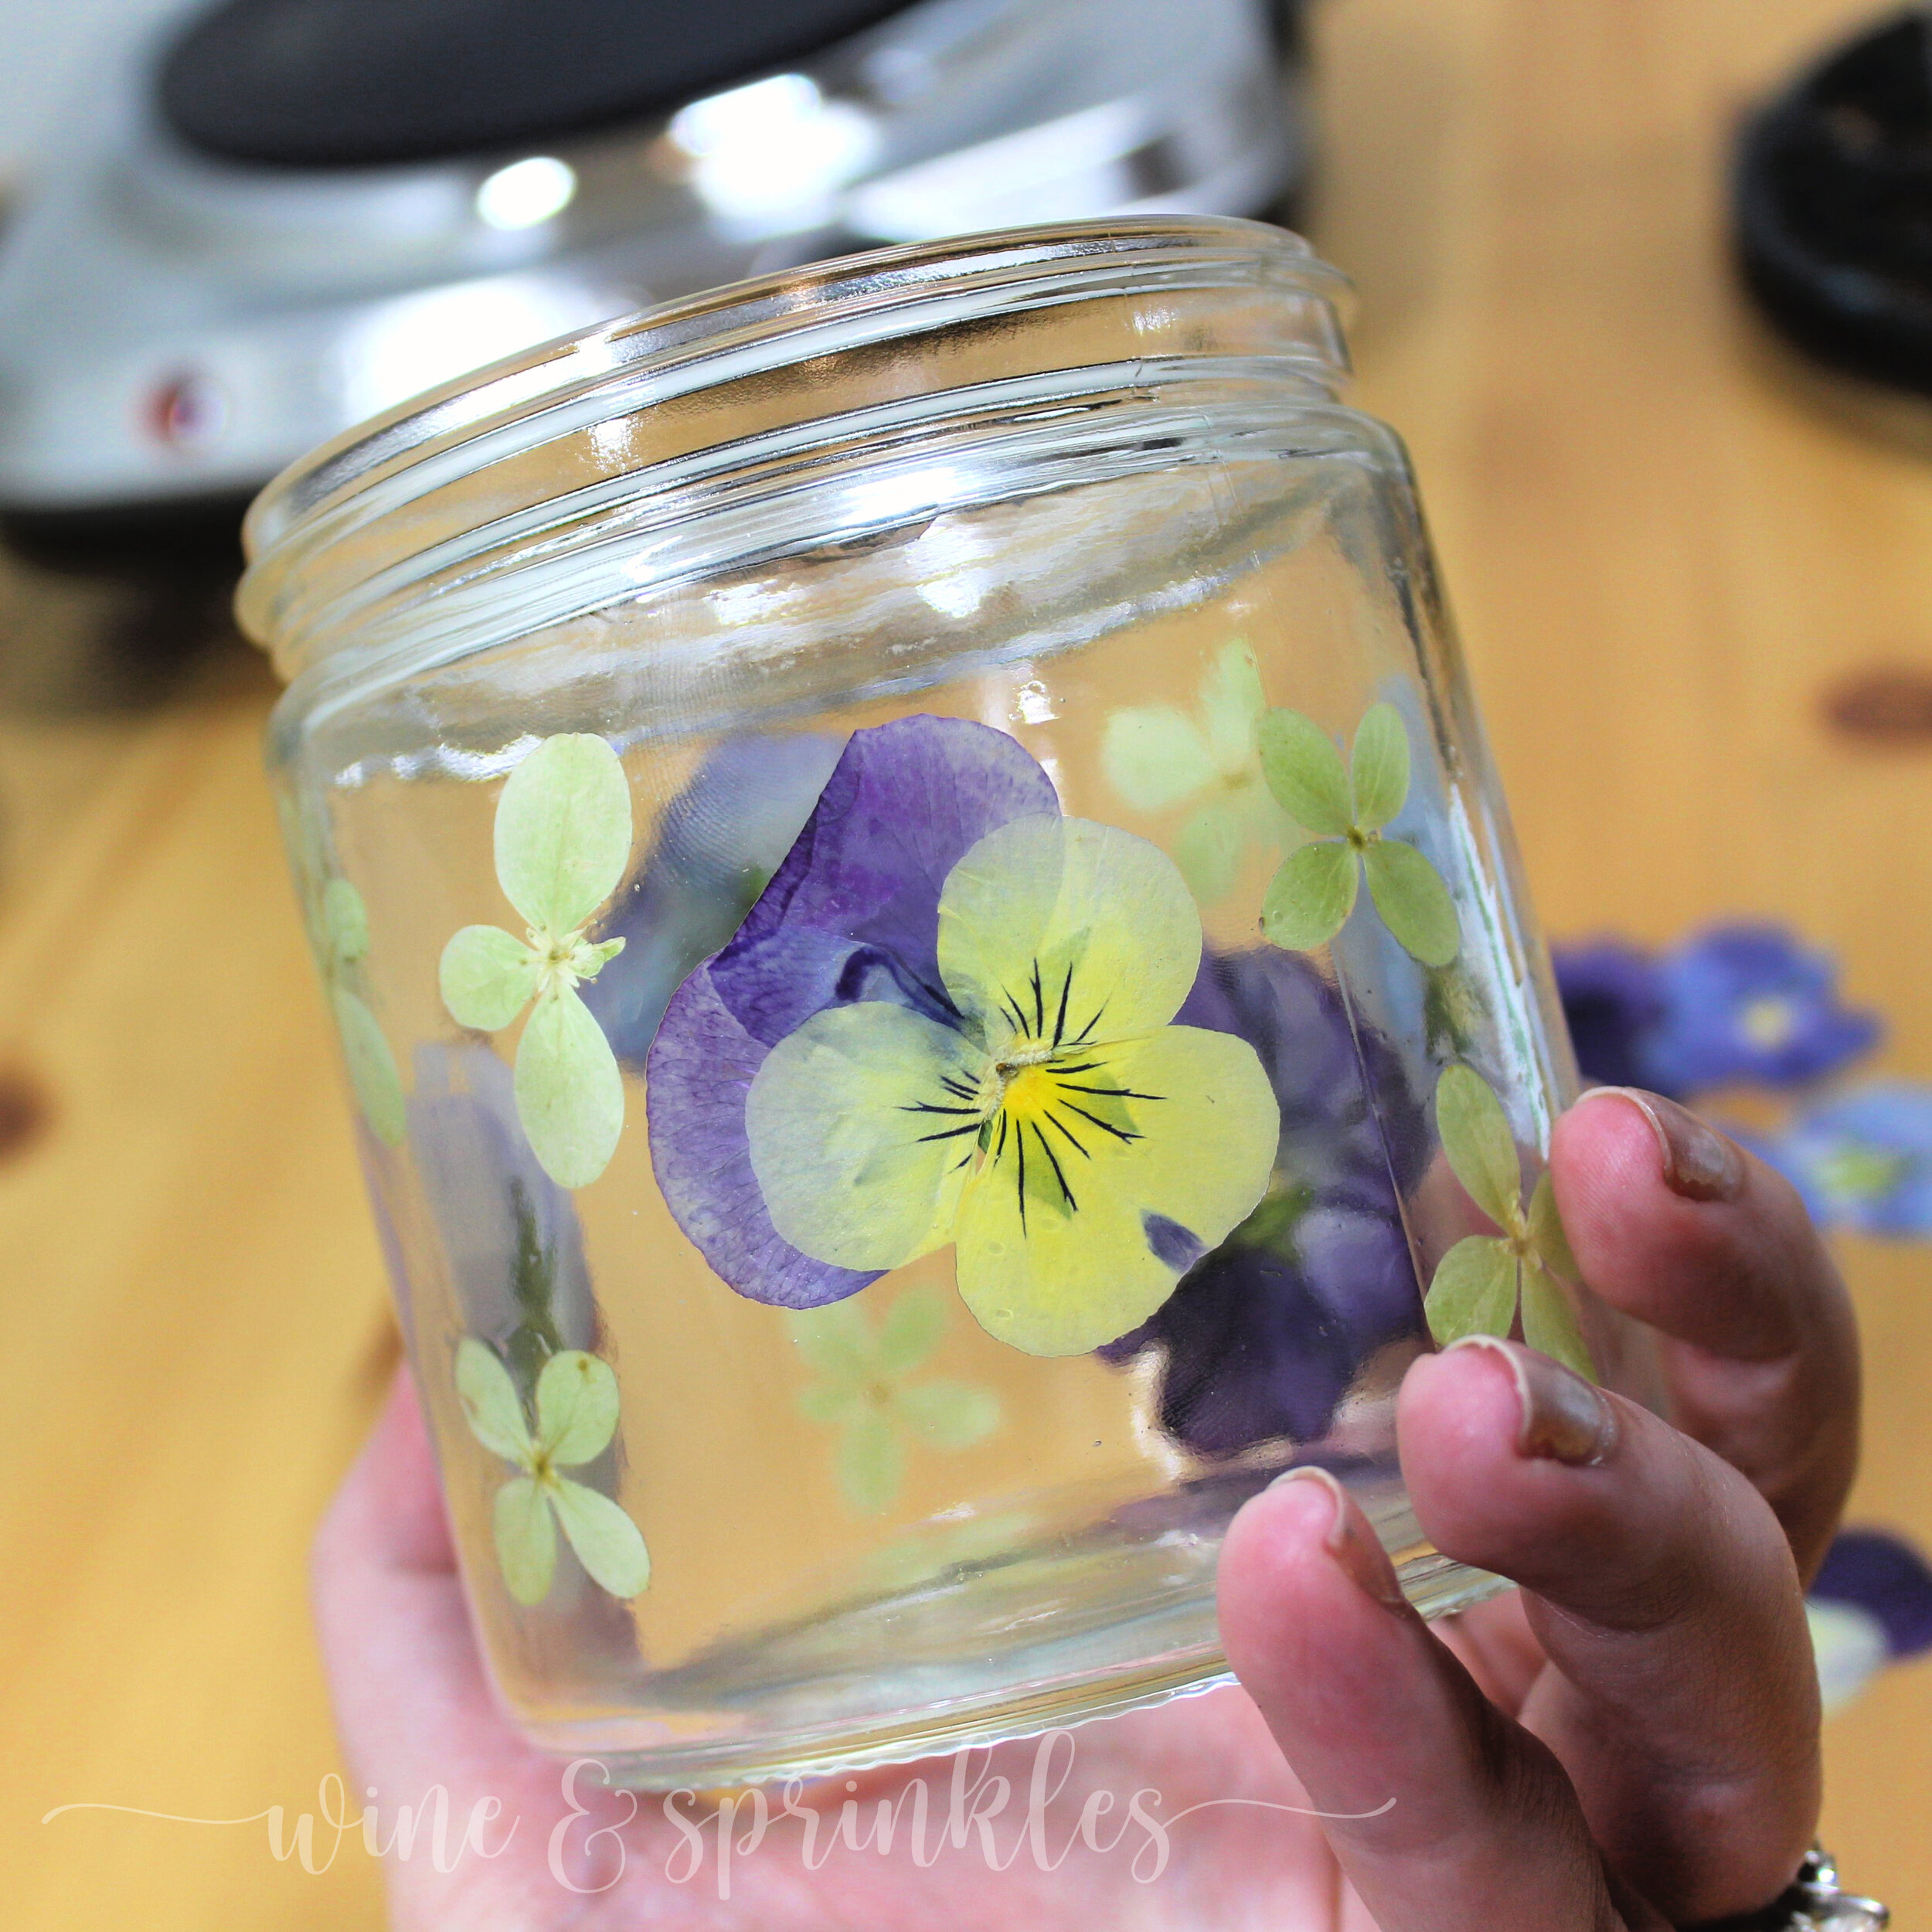 Can Dried Flowers Go in Candles? How to Safely Make Flower Candles